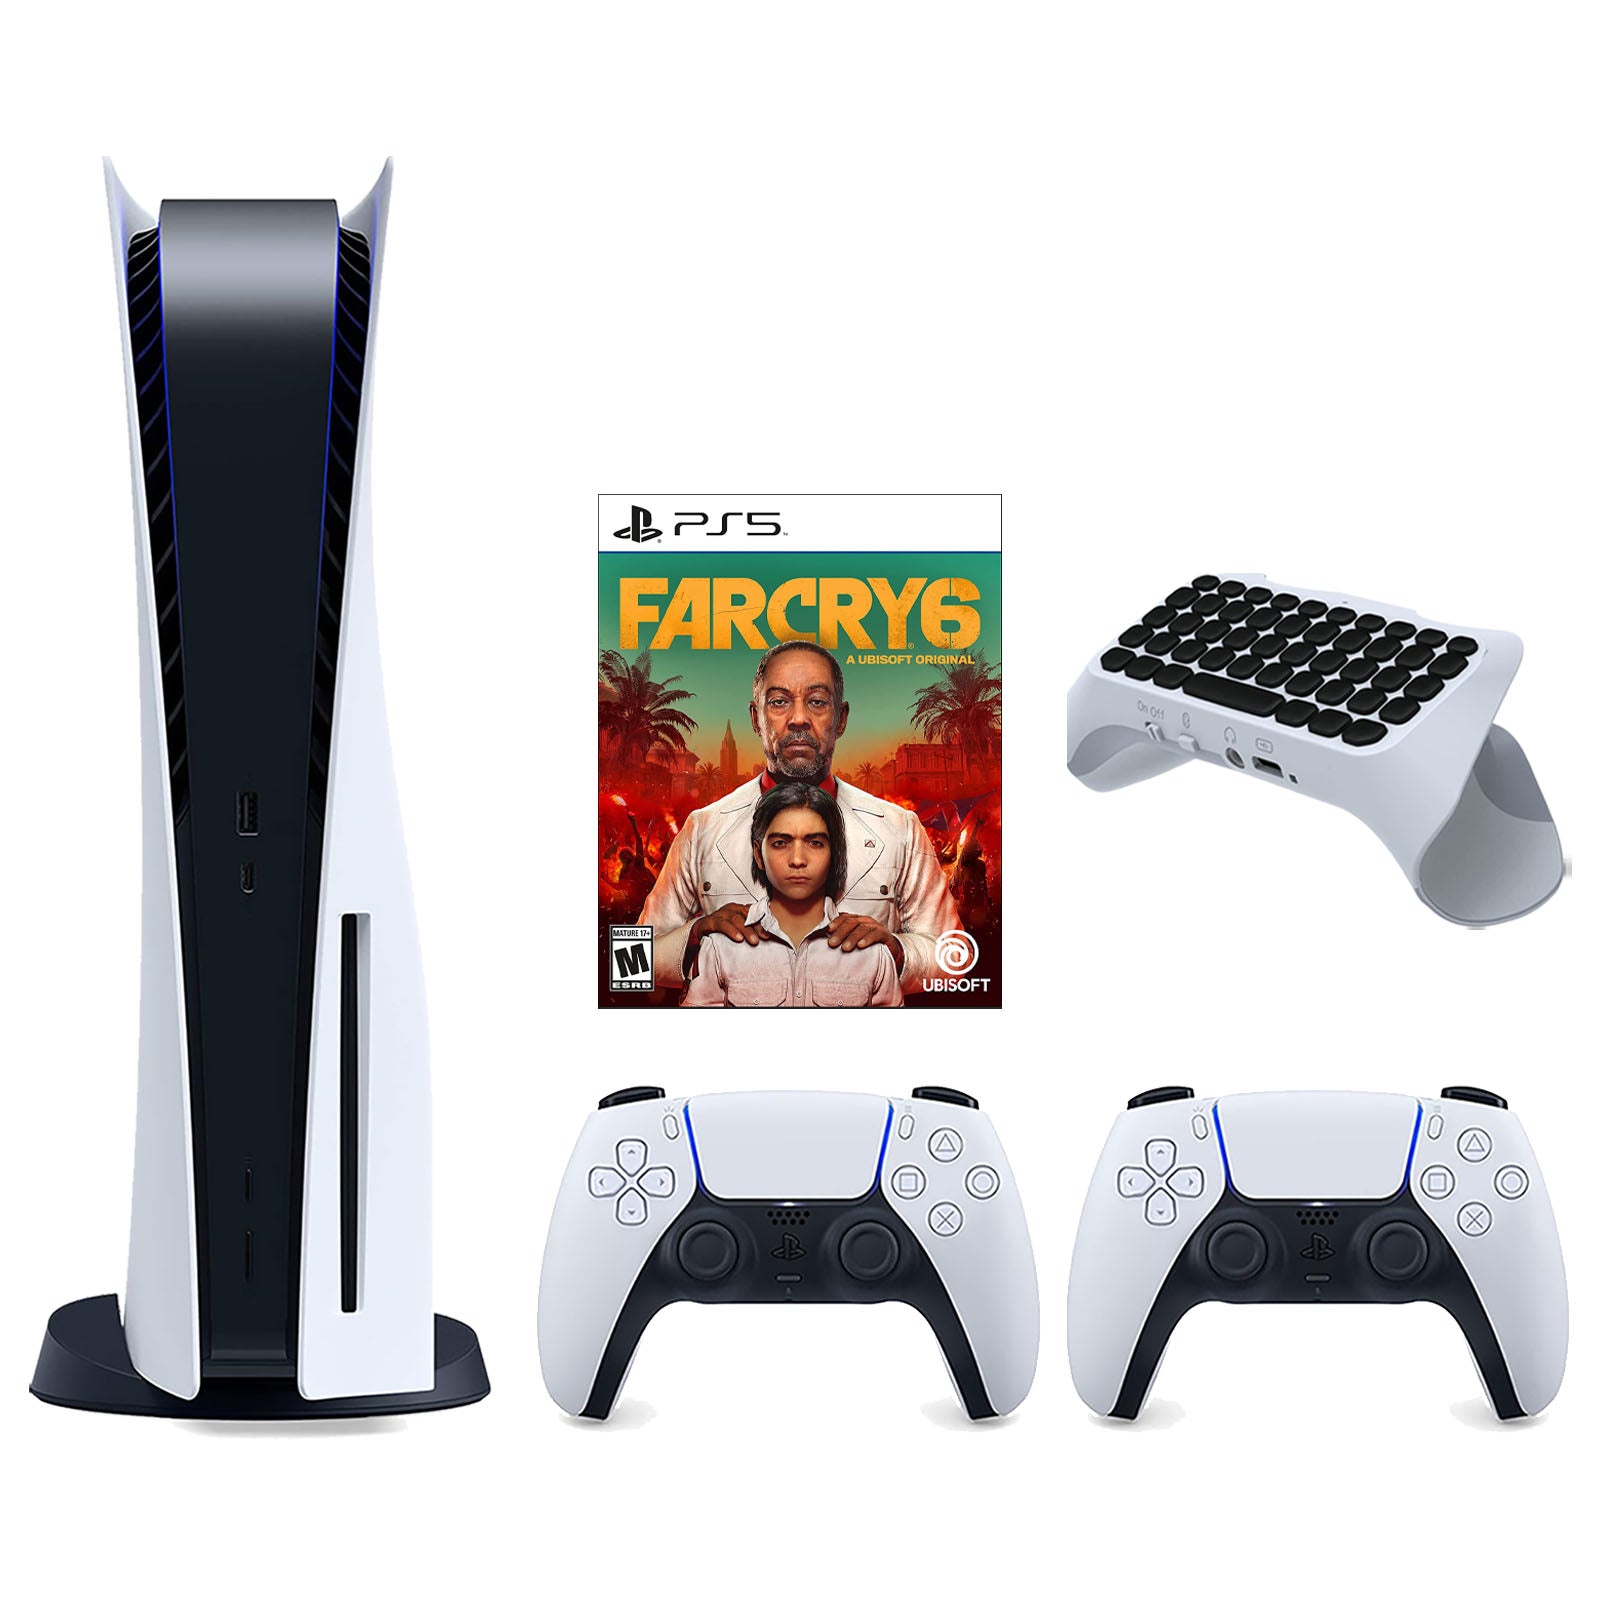 Sony Playstation 5 Disc Version Console with Extra White Controller, Surge QuickType 2.0 Wireless PS5 Controller Keypad and Far Cry 6 Bundle - Pro-Distributing